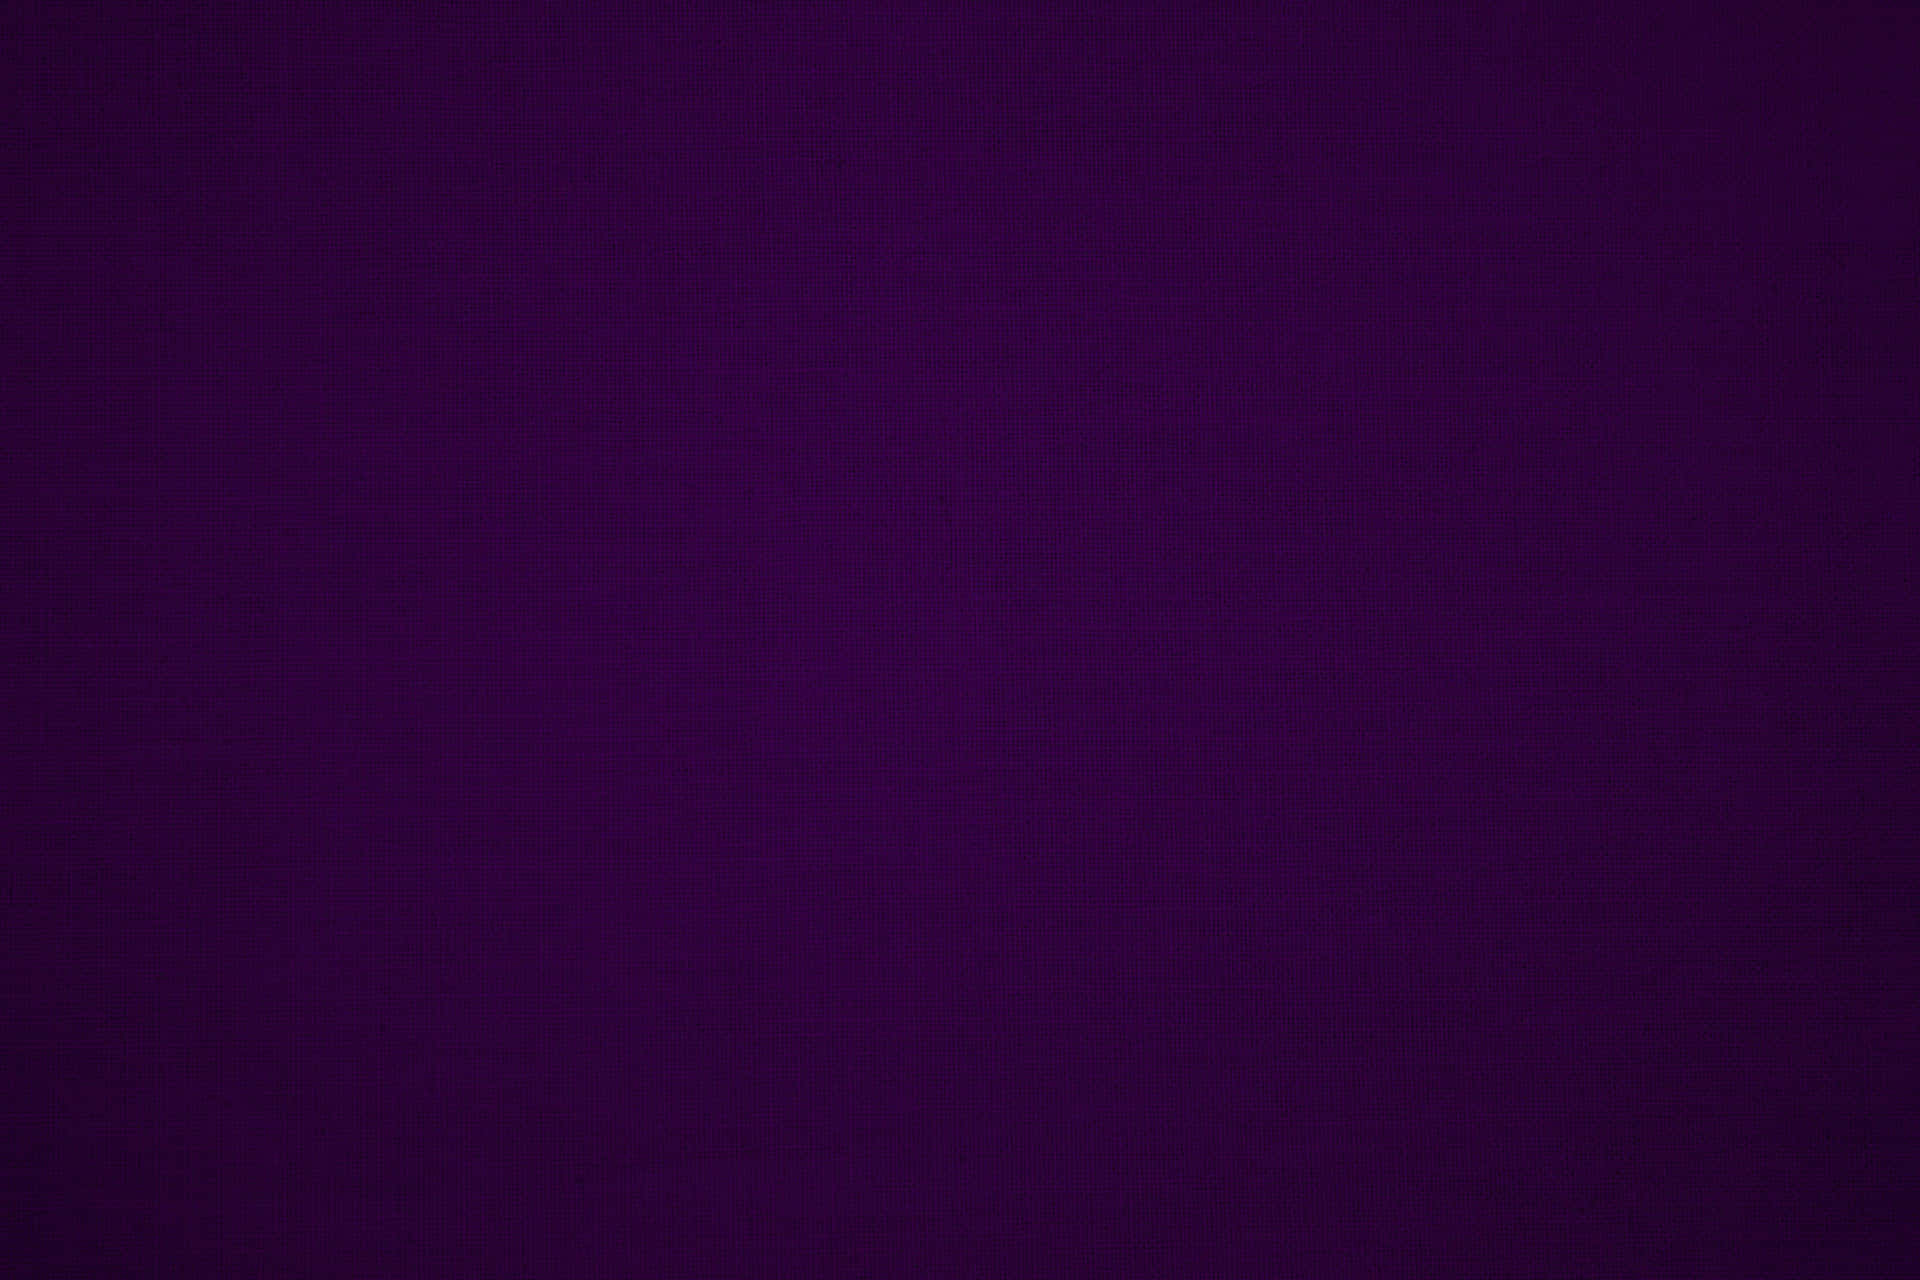 A vibrant solid purple background Wallpaper